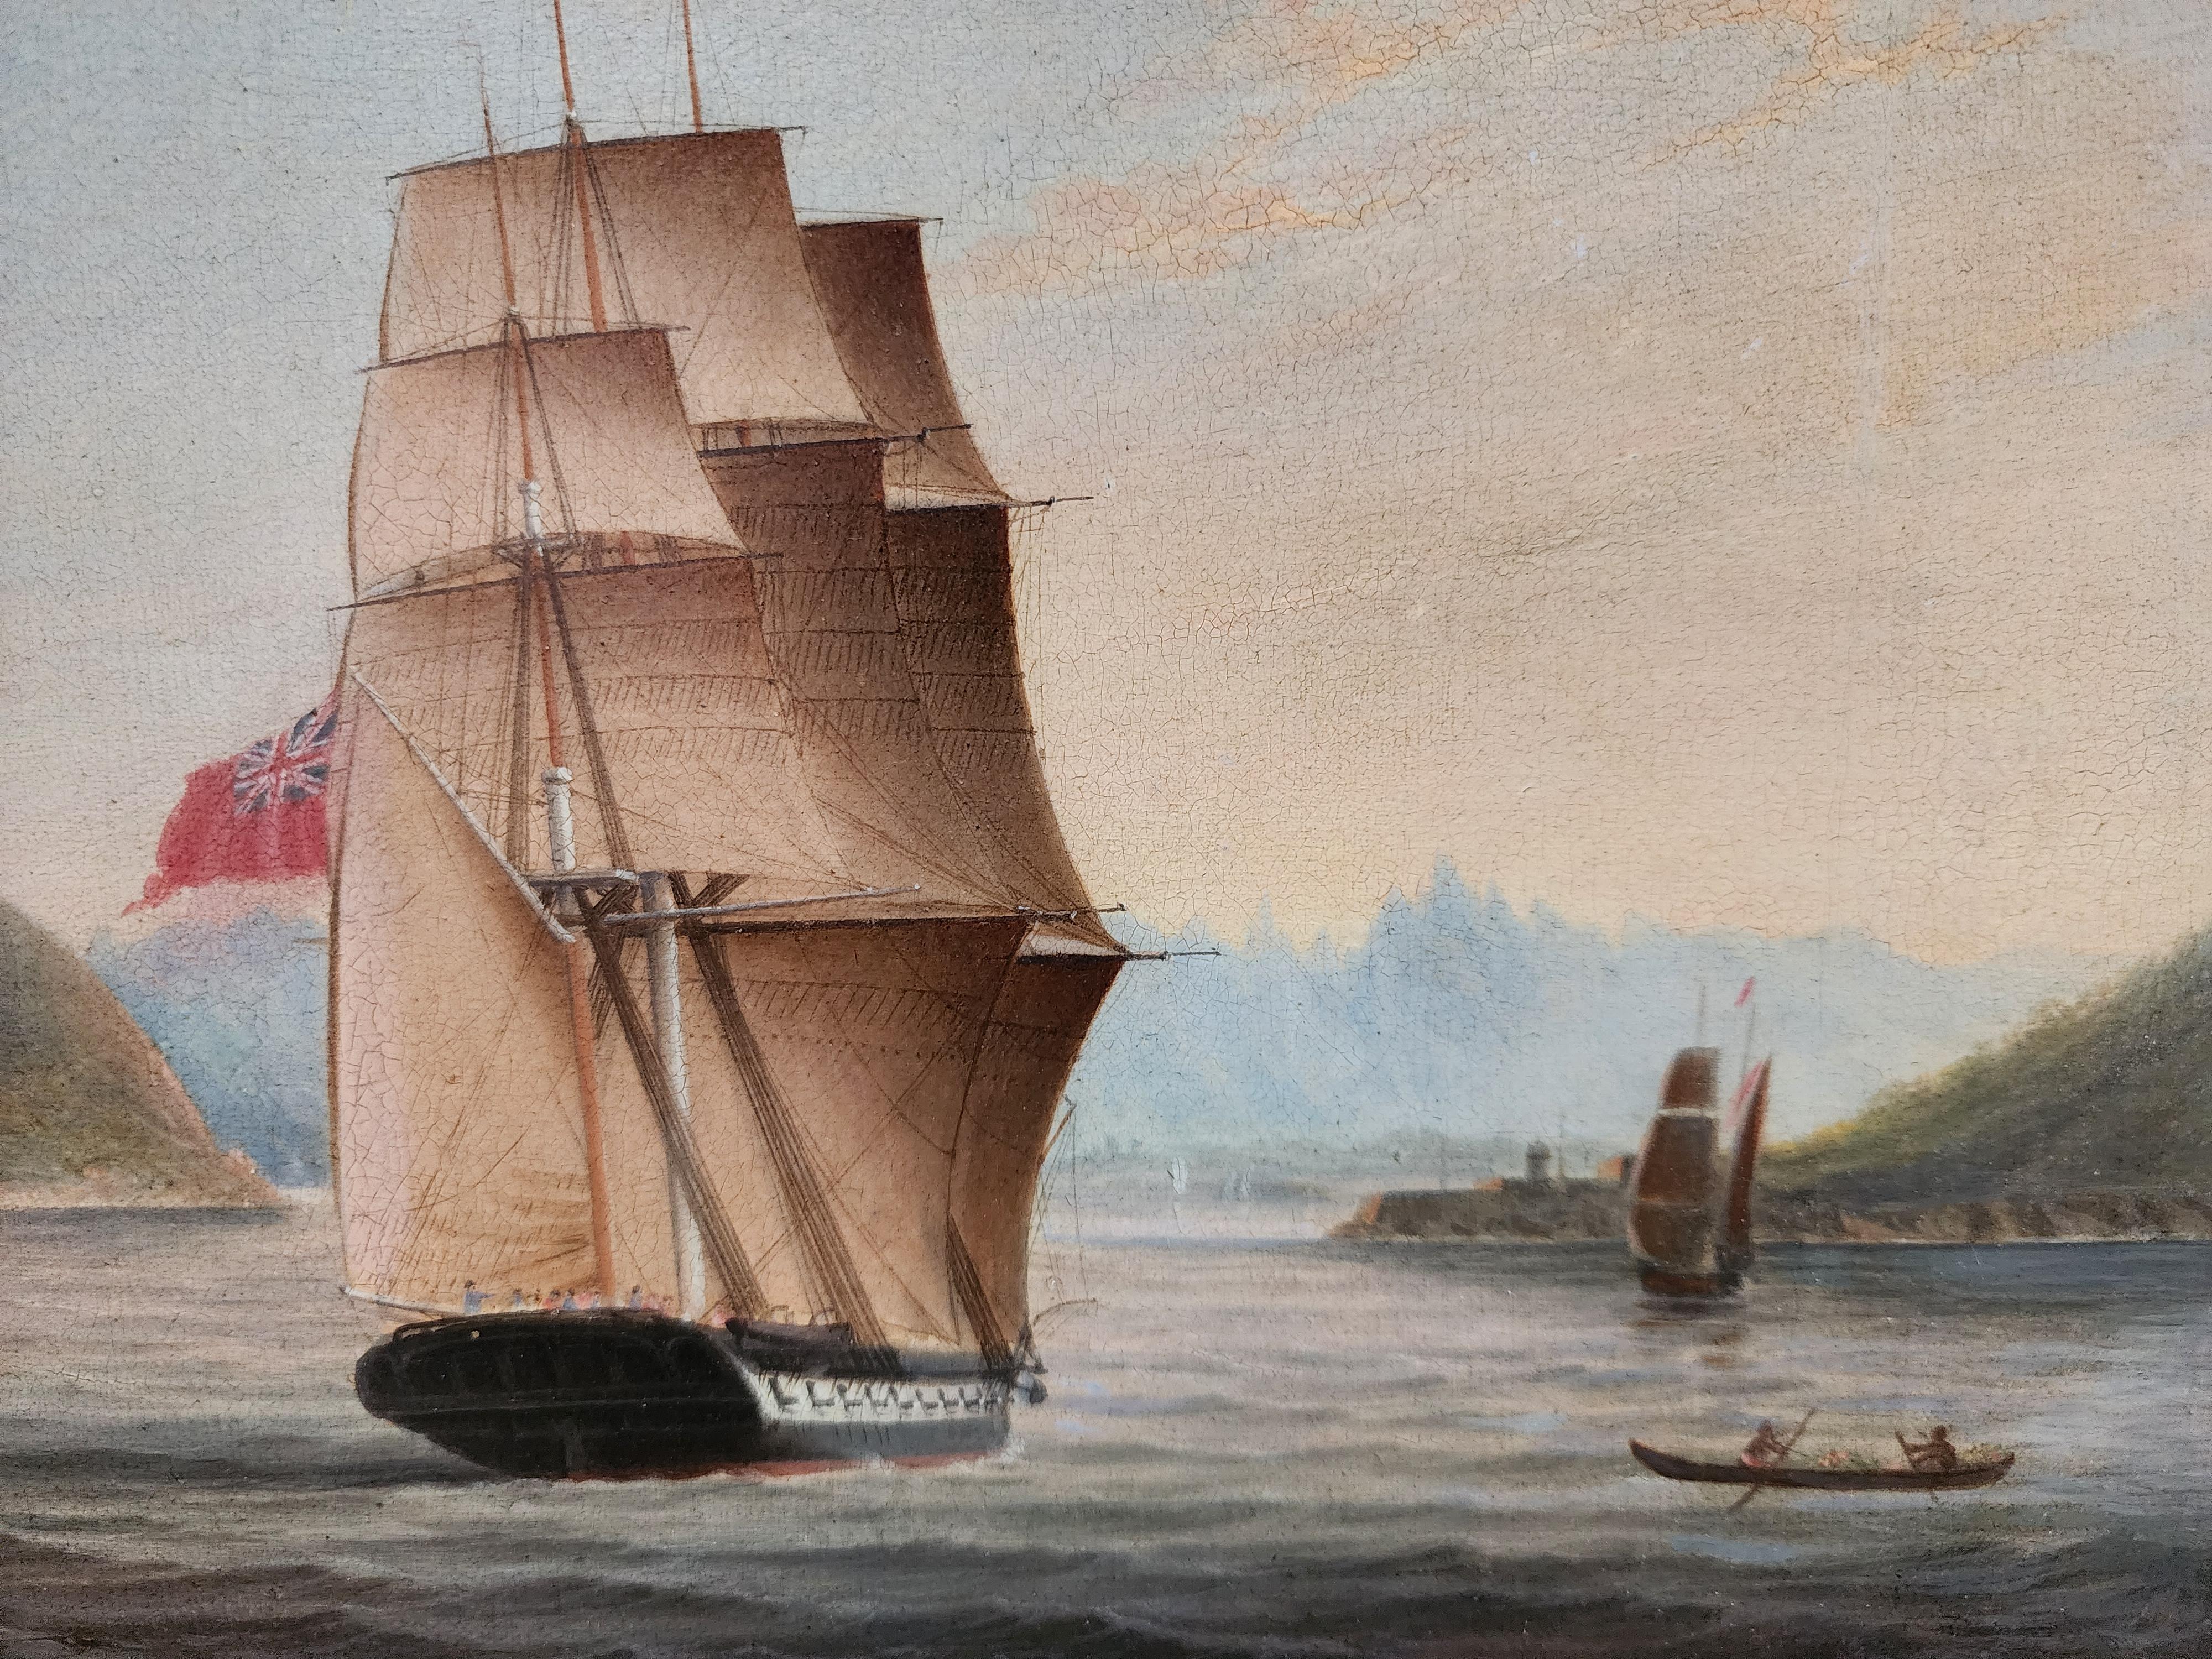 Coming into Port, British Seascape, Maritime Painting, Antique Ship Painting  1